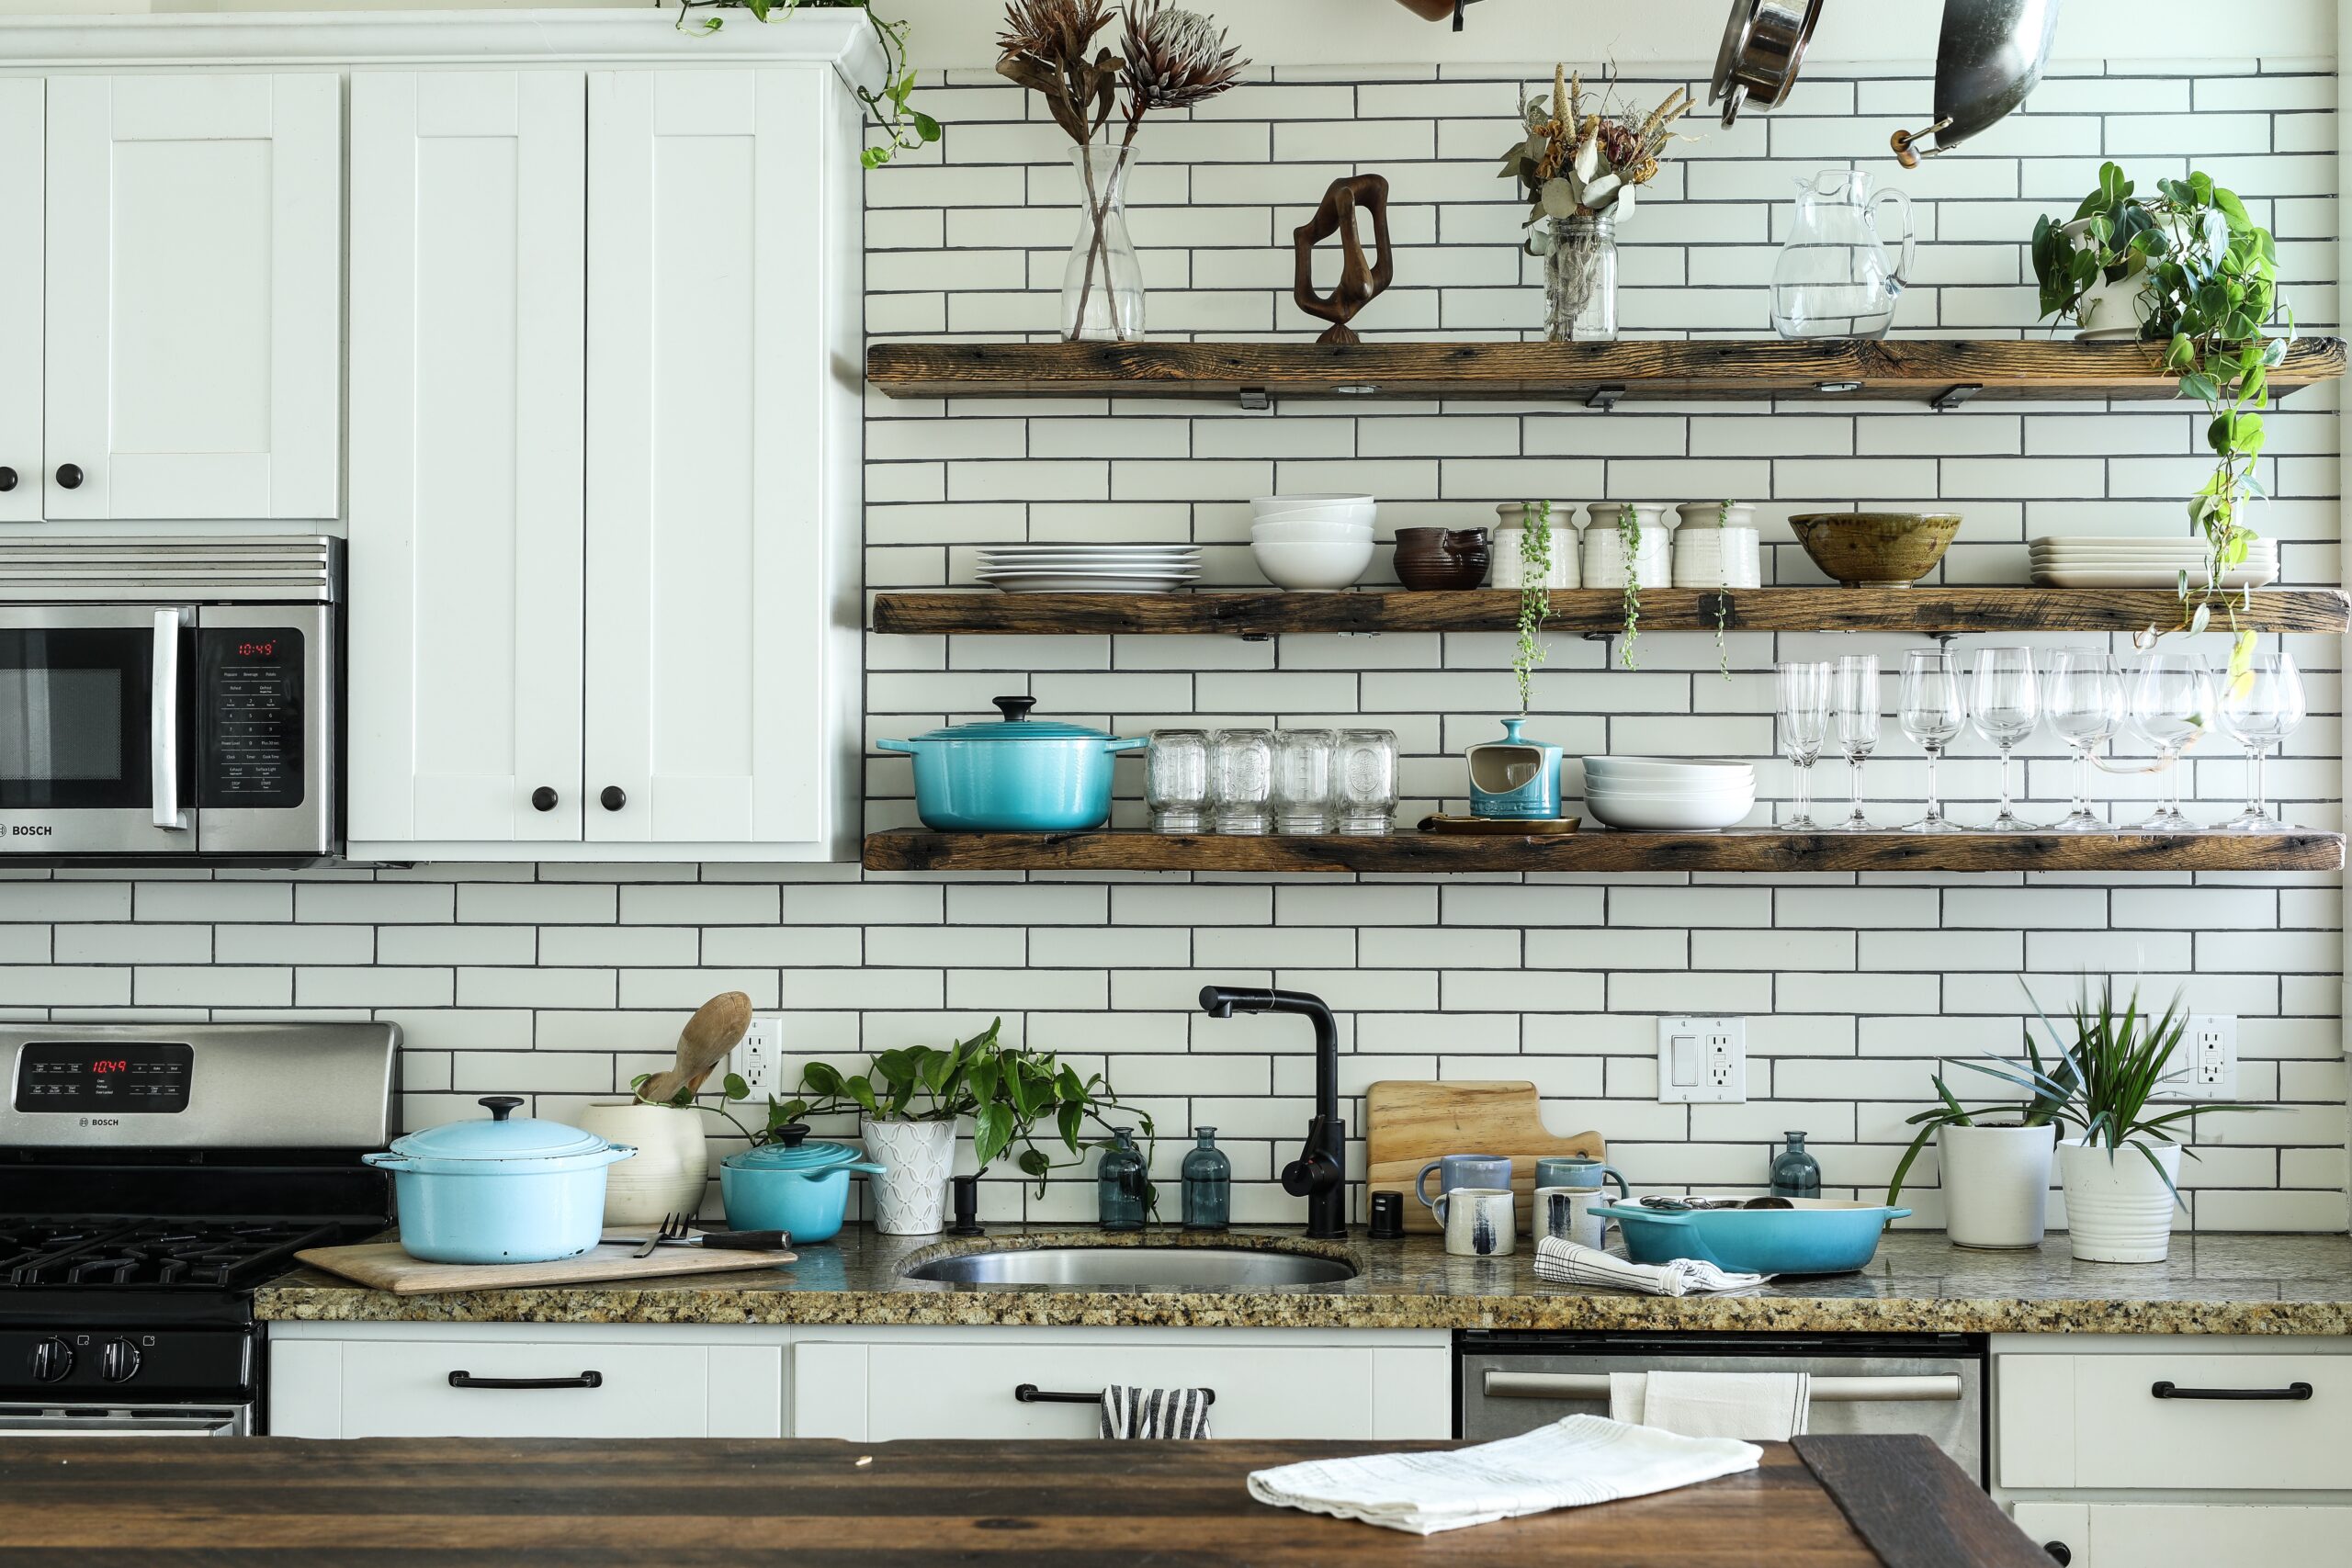 Choose the right color combinations for your kitchen grout and tile. Pictured: A kitchen backsplash with decorations.